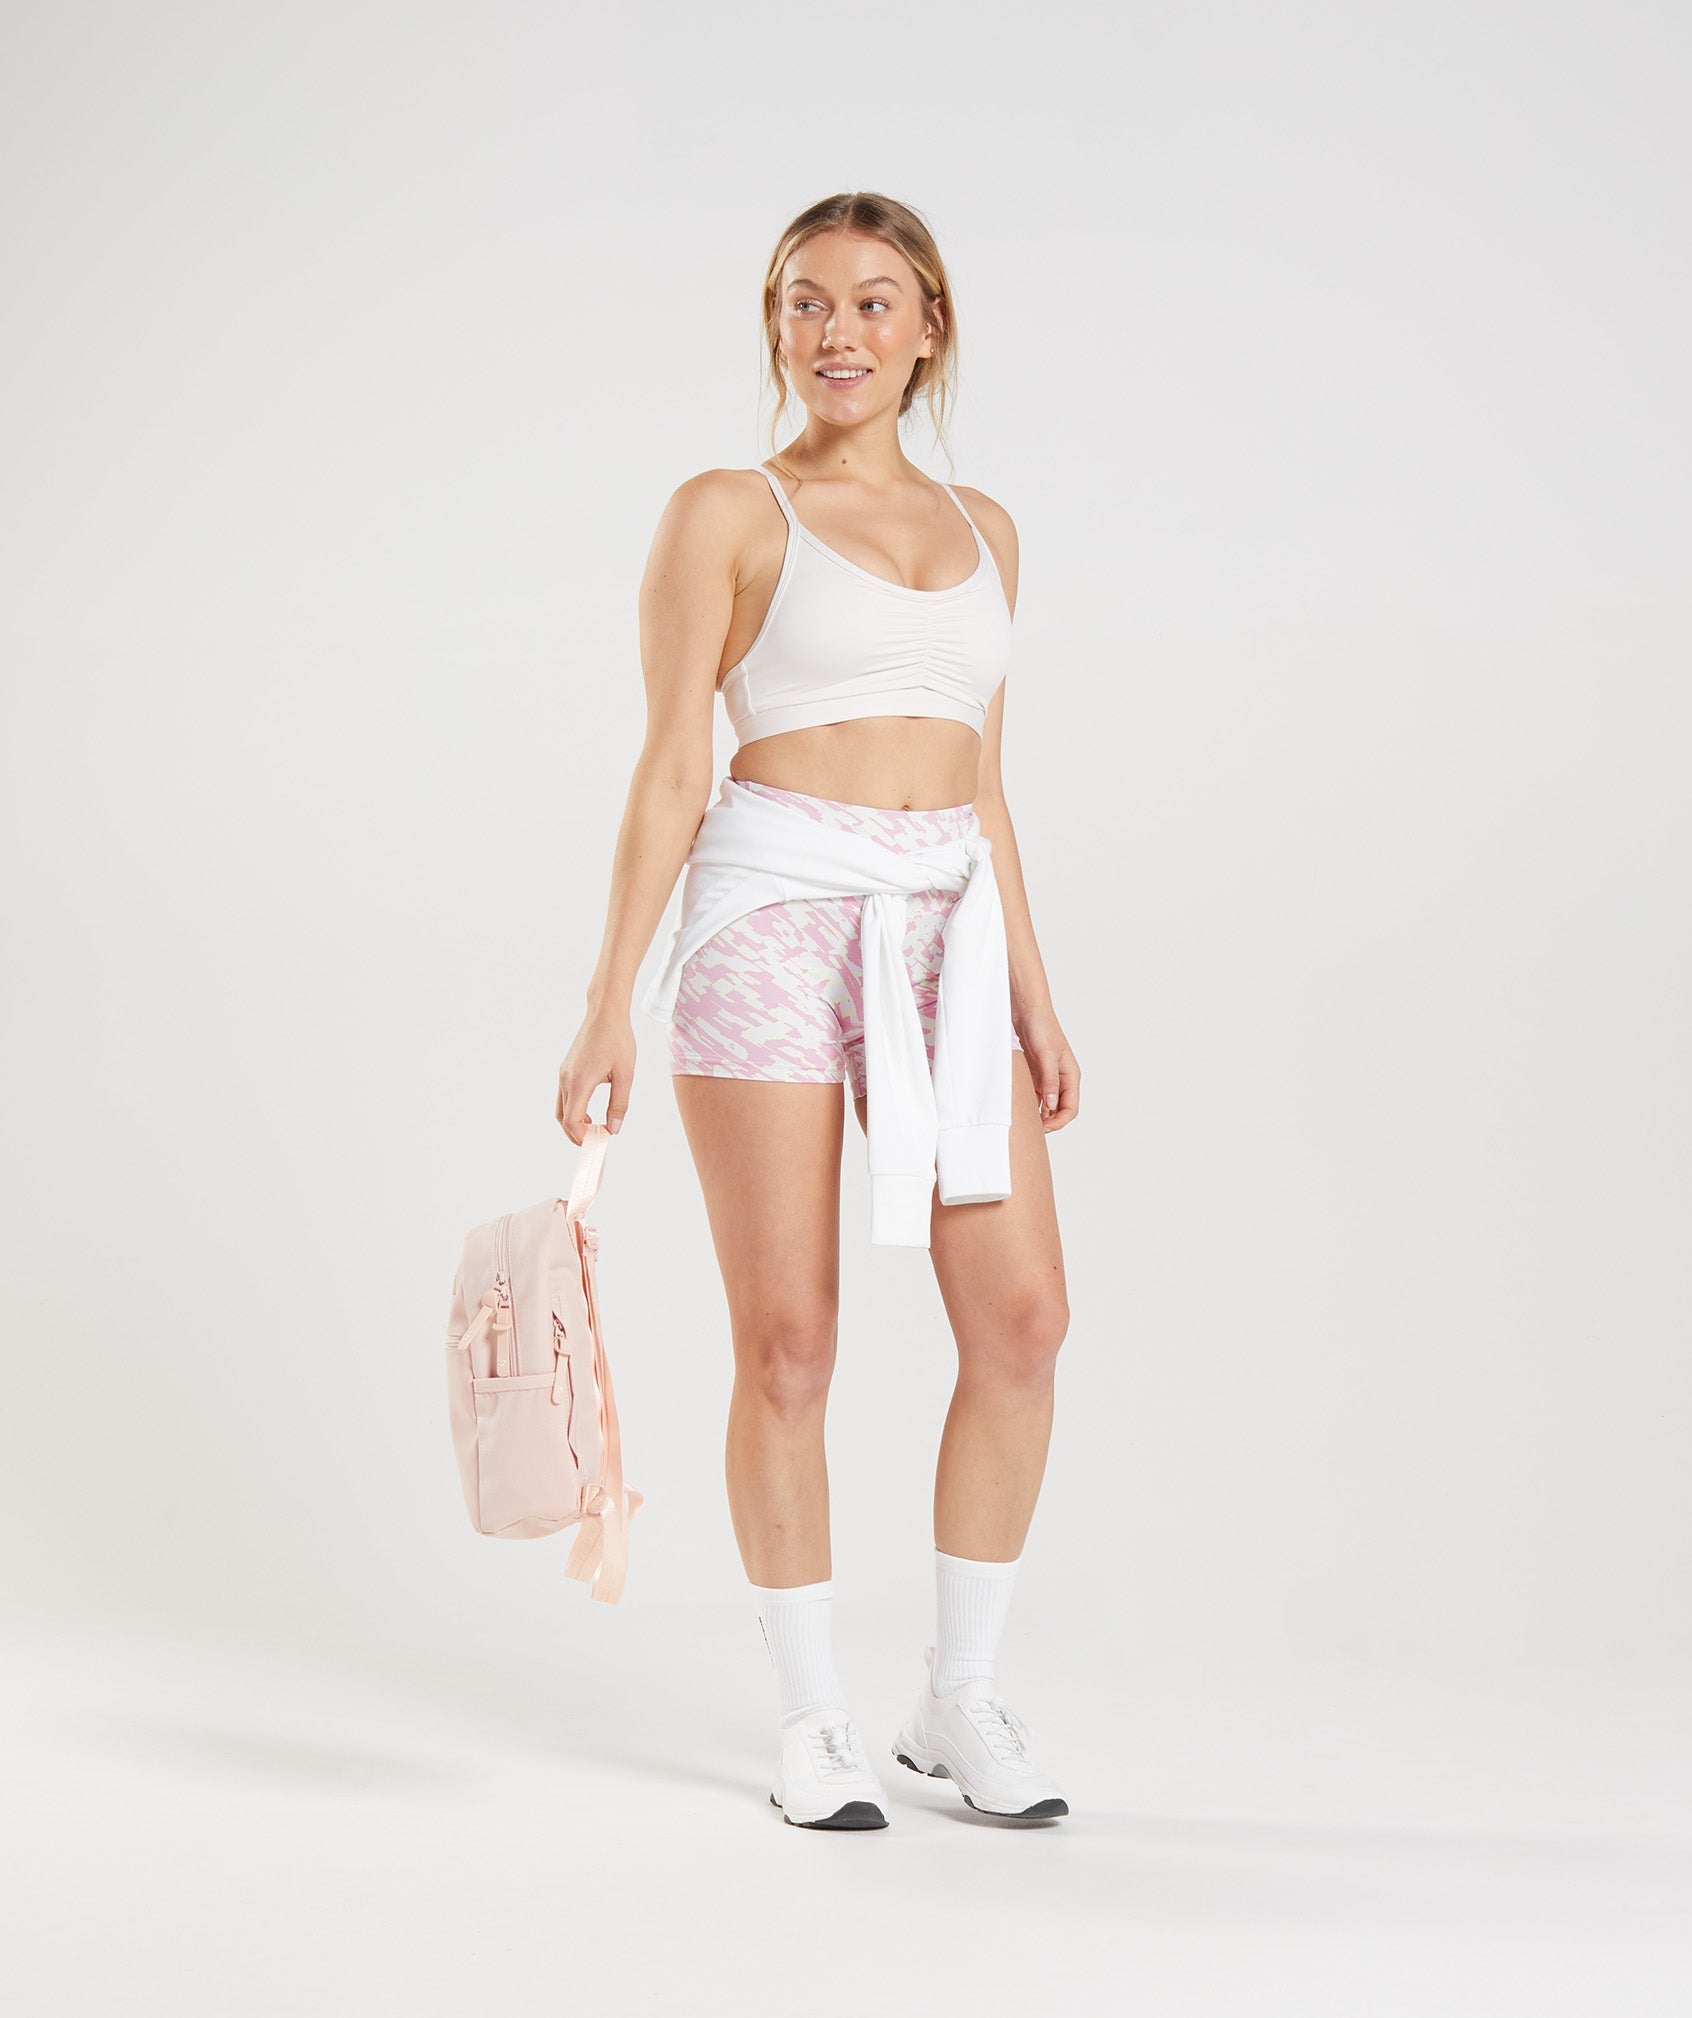 Ruched Sports Bra in Coconut White - view 4